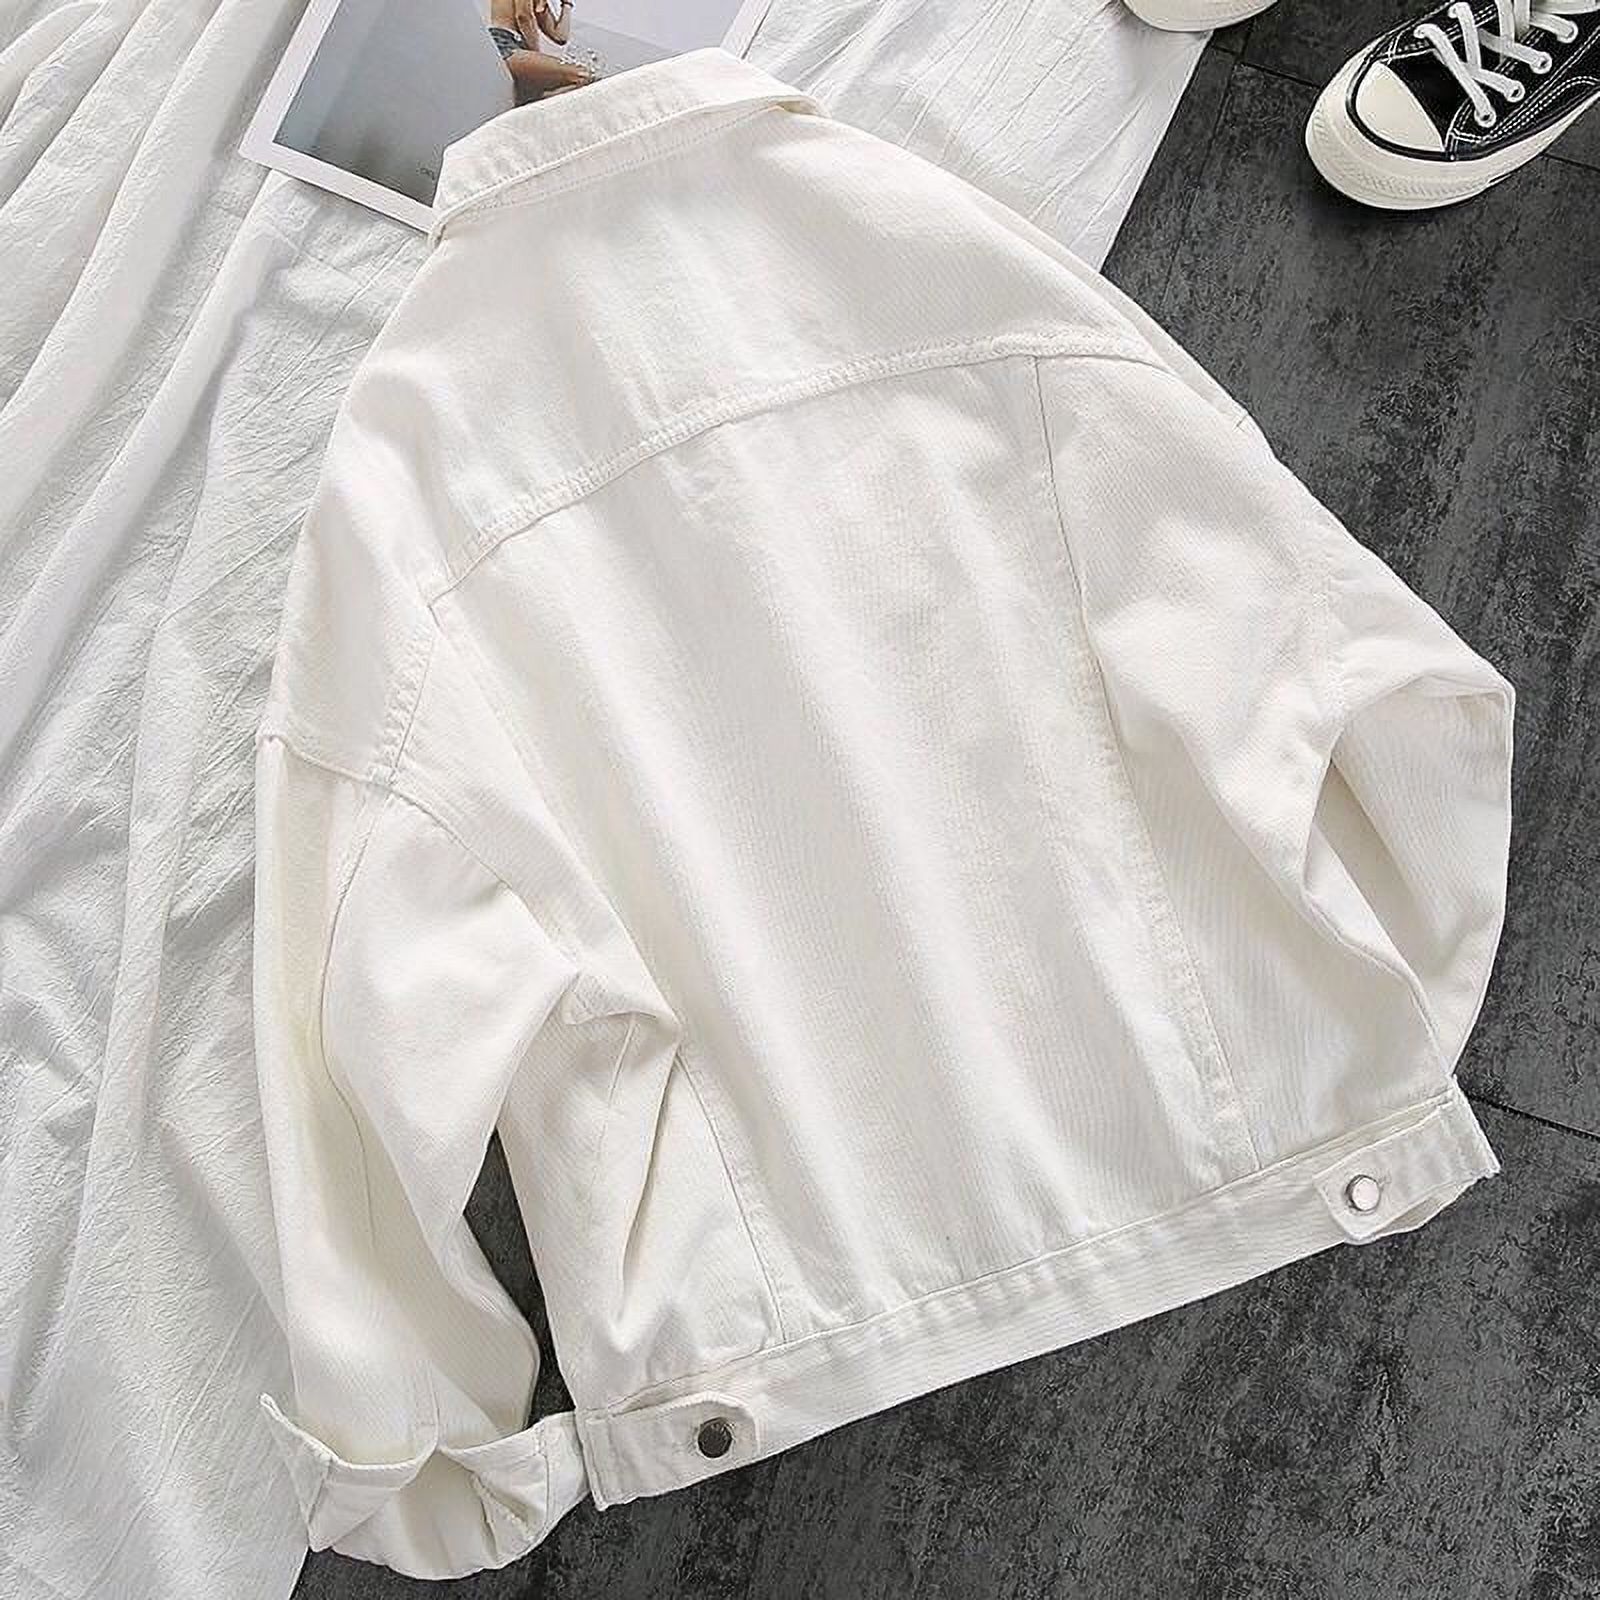 PIKADINGNIS Lucuever White Denim Jacket Women Autumn Casual Loose Turndown Collar Jean Coats Woman Solid Color All-match Button Jackets - image 2 of 6